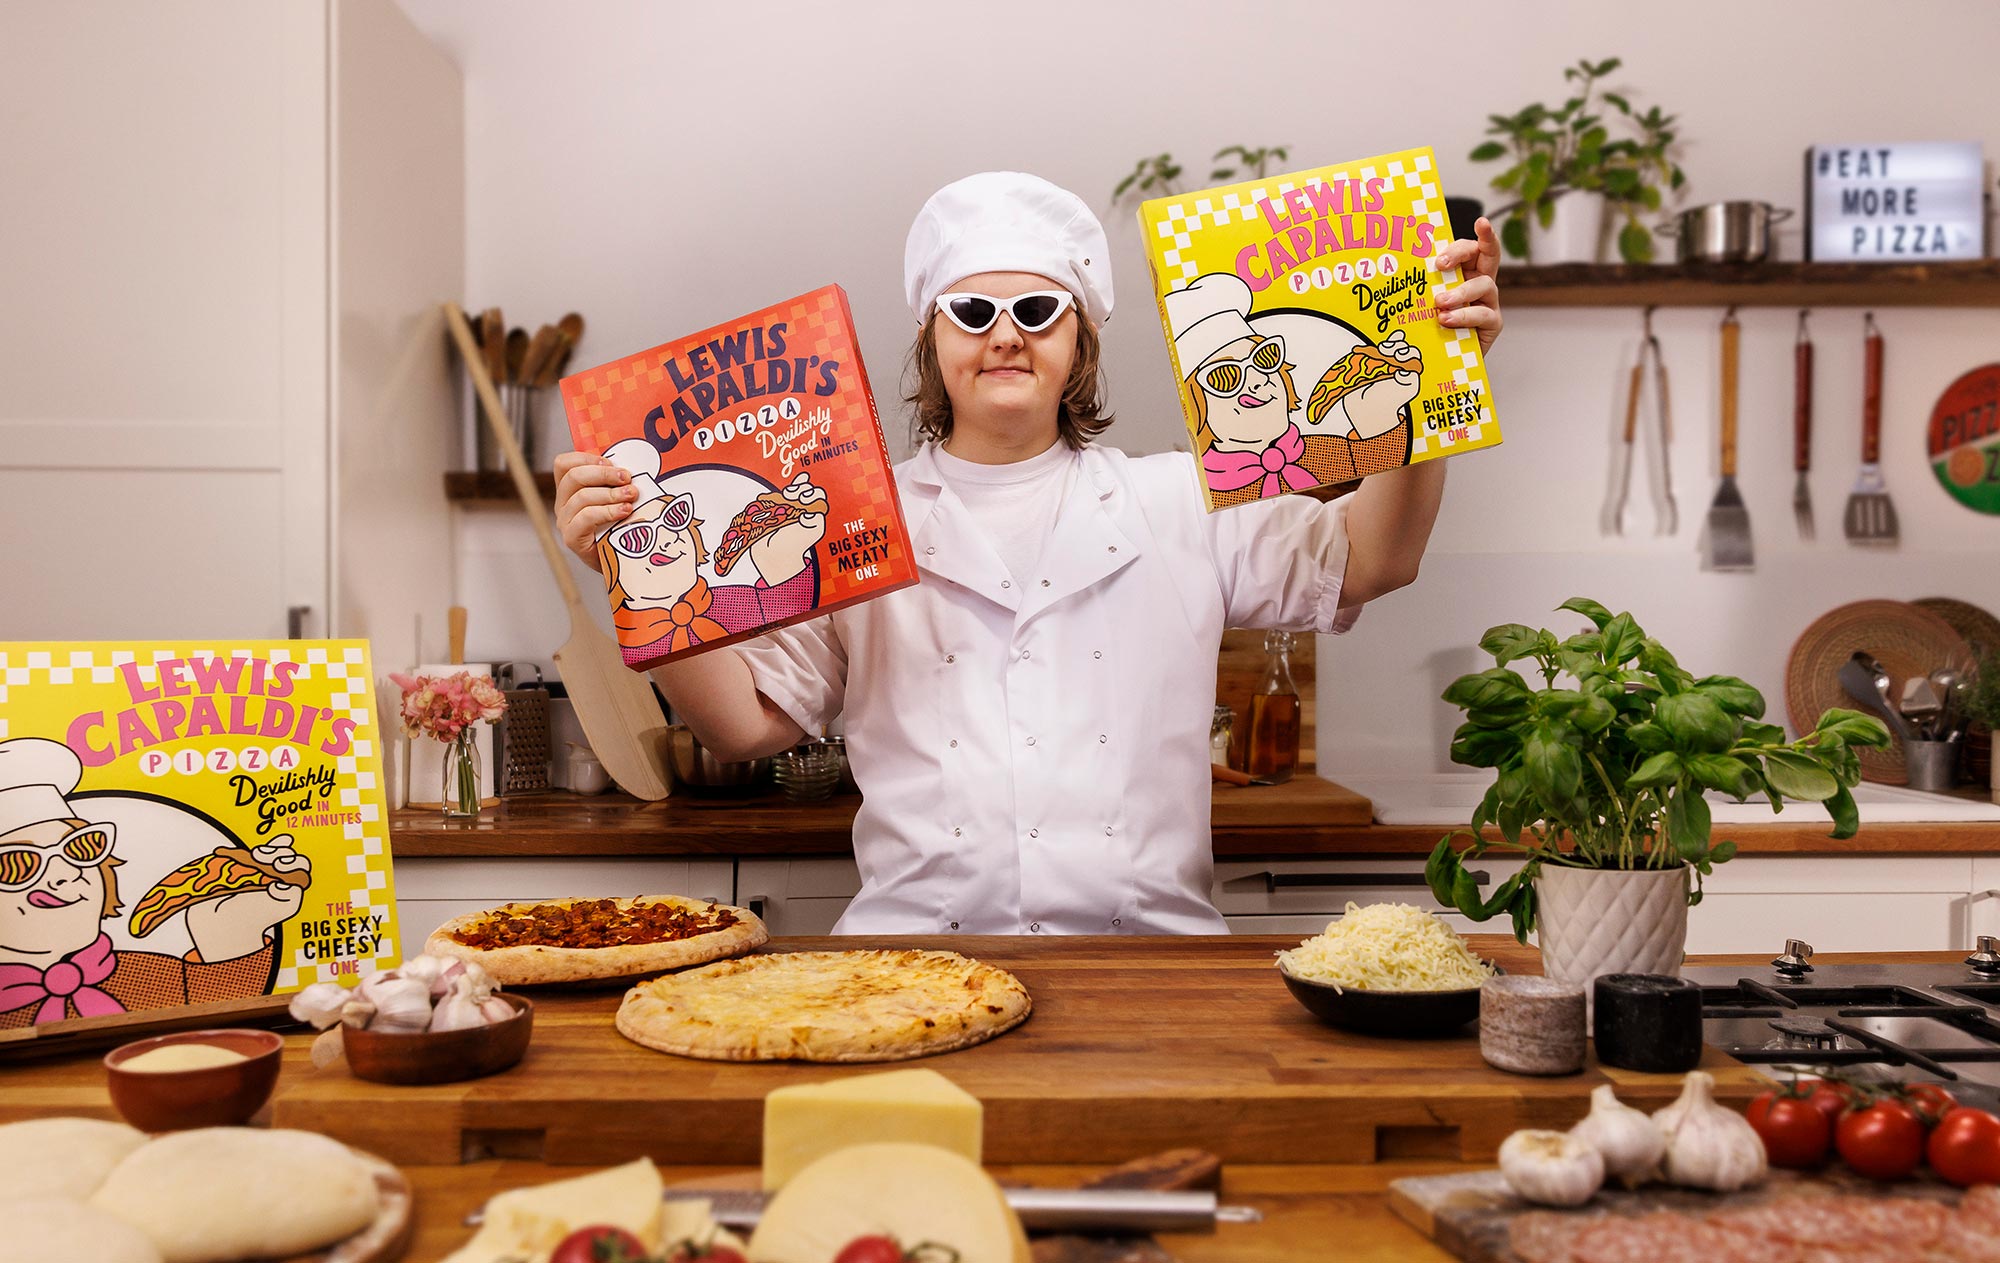 Photograph of Lewis Capaldi in a kitchen, wearing chef whites, holding two pizza boxes and standing infront of a table with pizzas, garlic, cheese and herbs.